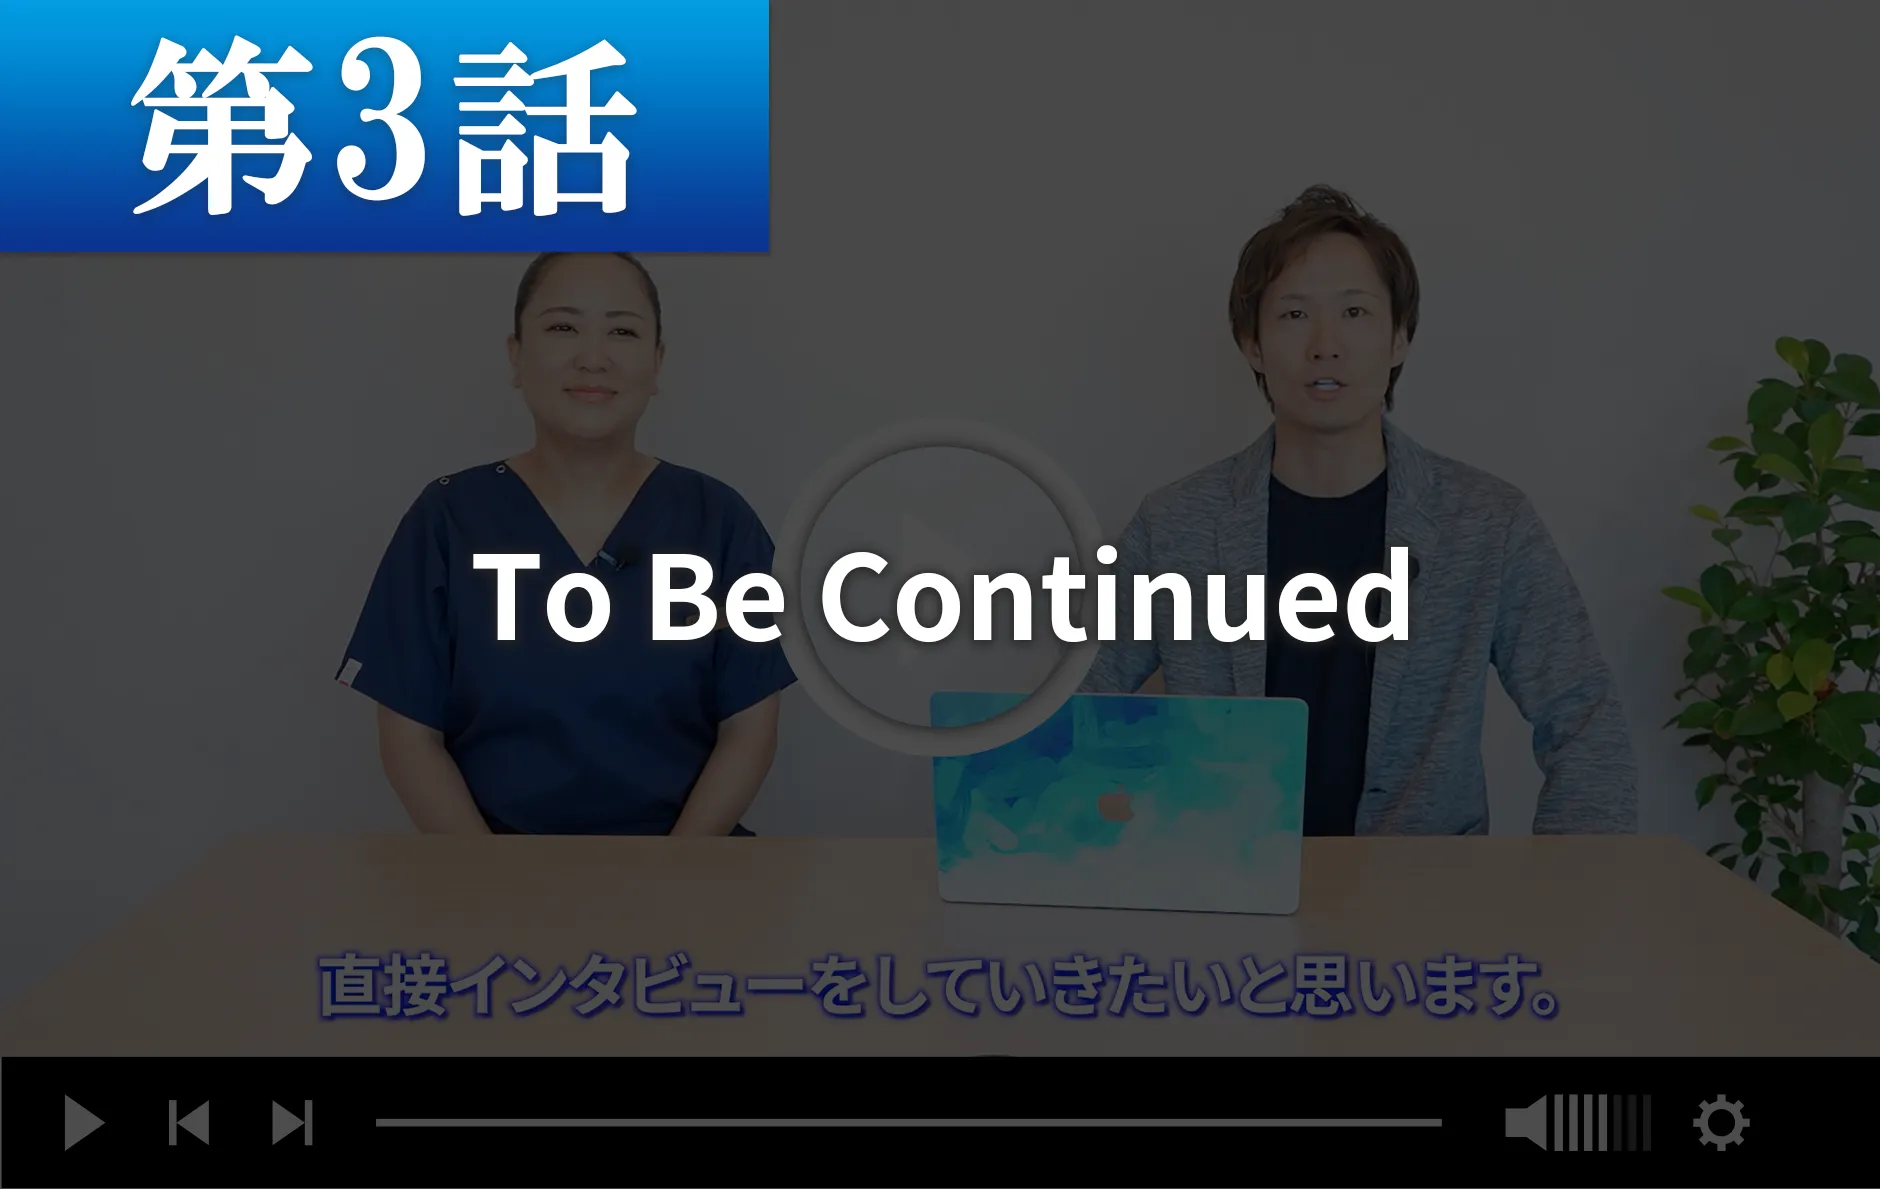 To Be Continued